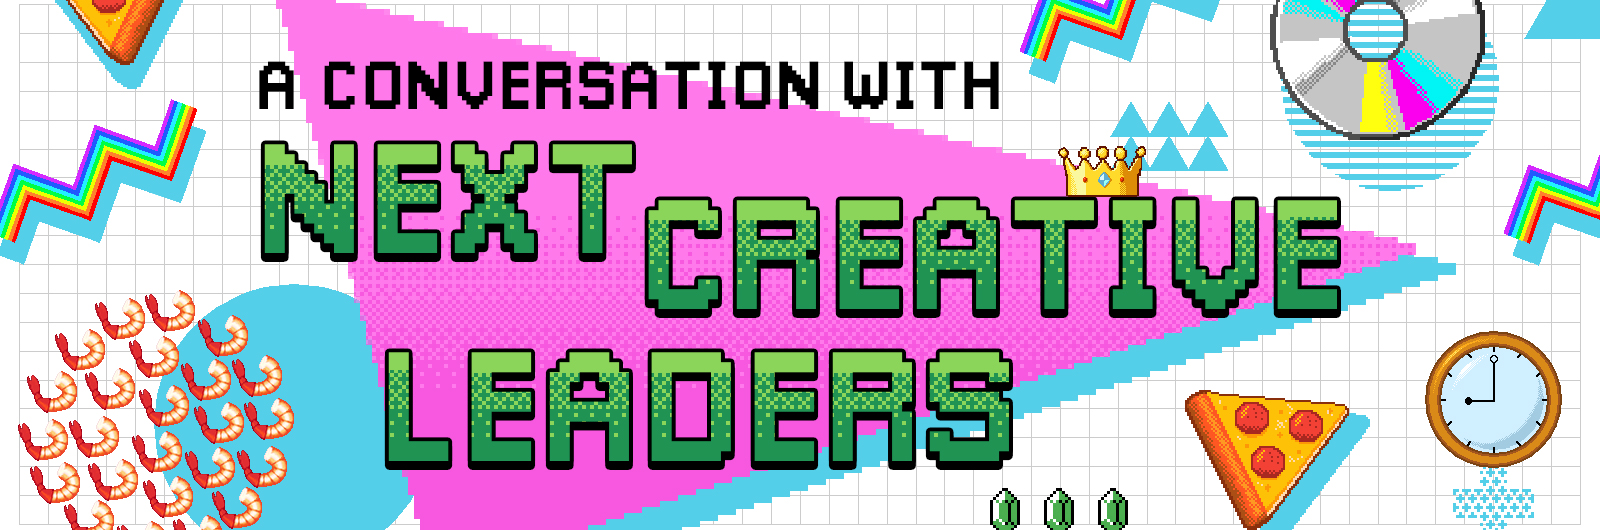 A Conversation With Next Creative Leaders